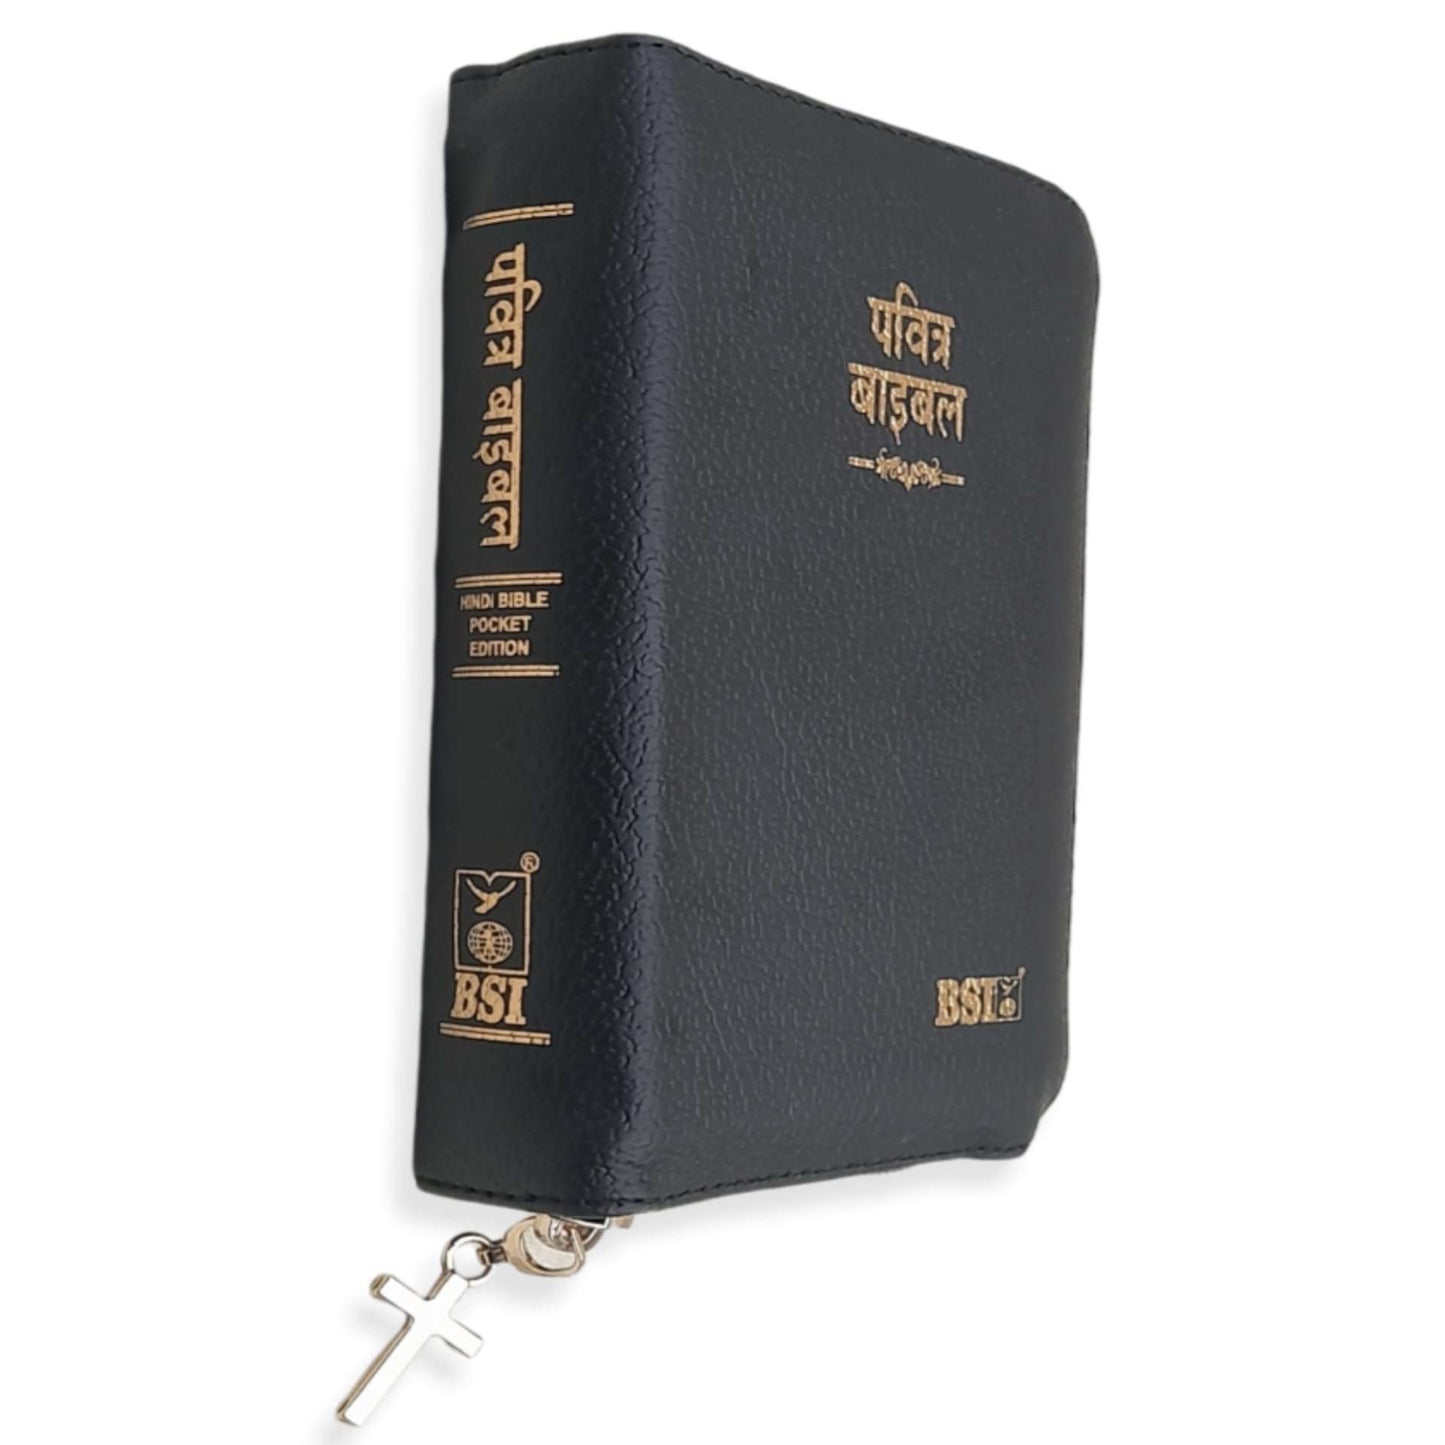 The Holy Hindi Pocket Bible Smaller Vinyl Ti Gilt Zip/Index Bsi Contains Old And New Testament